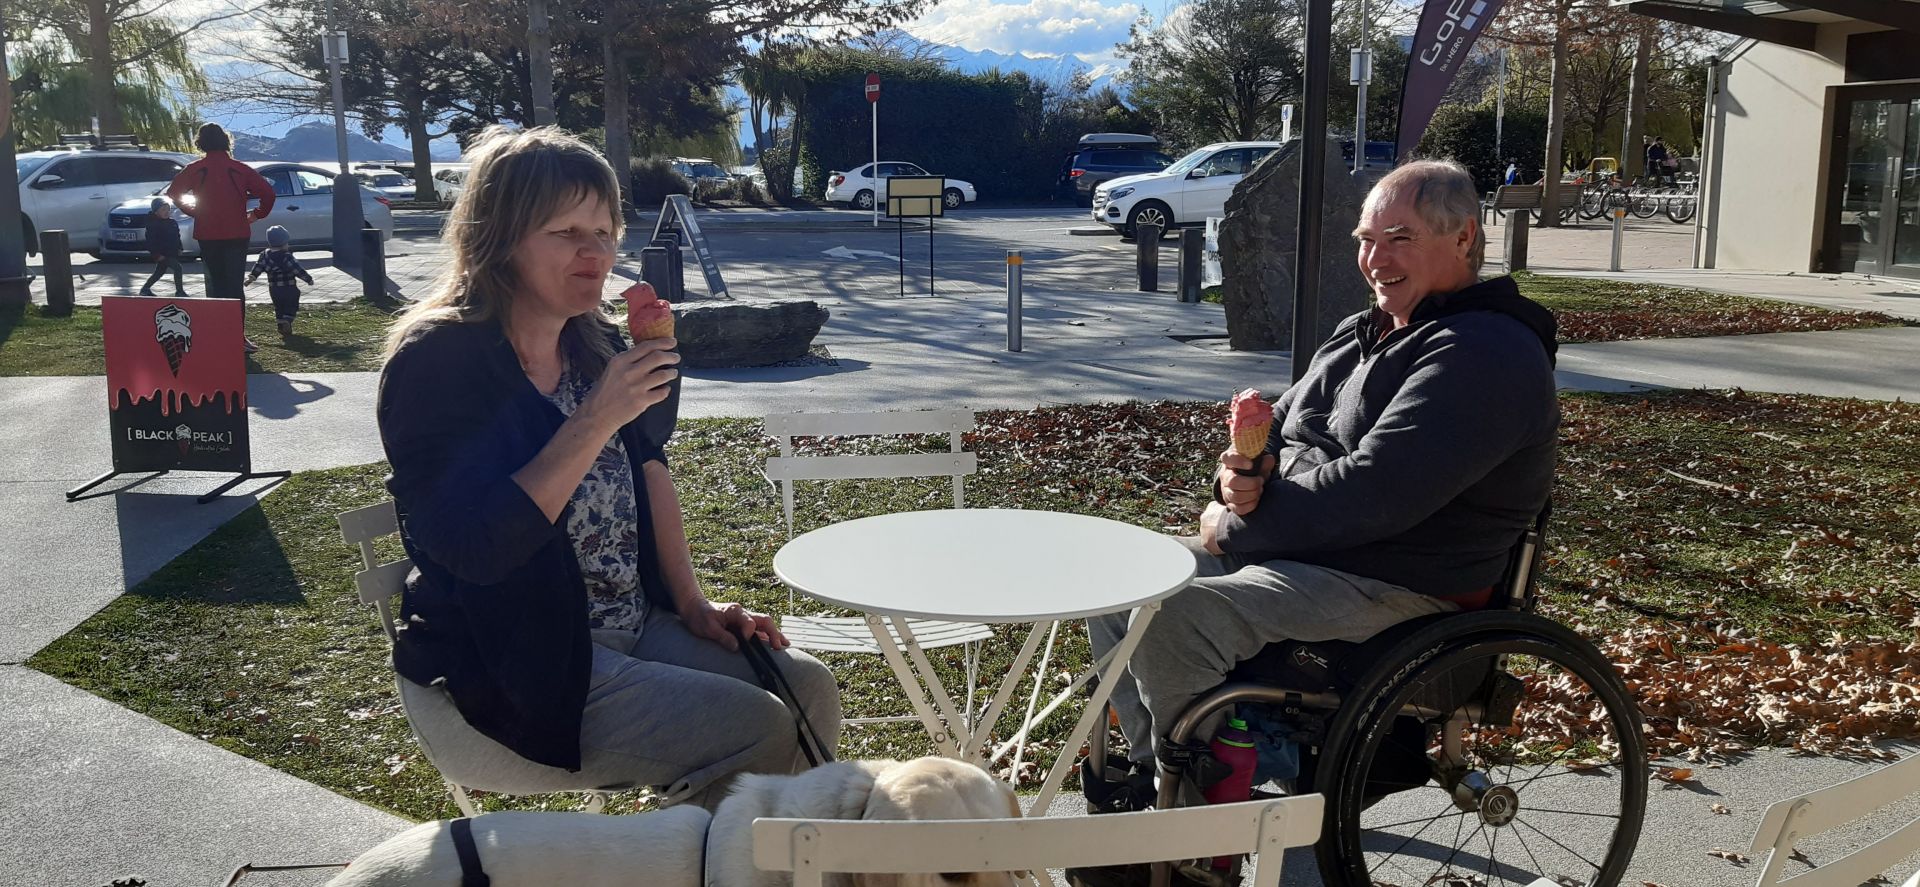 Two people out in town enjoying ice cream at Black Peak in Wanaka.